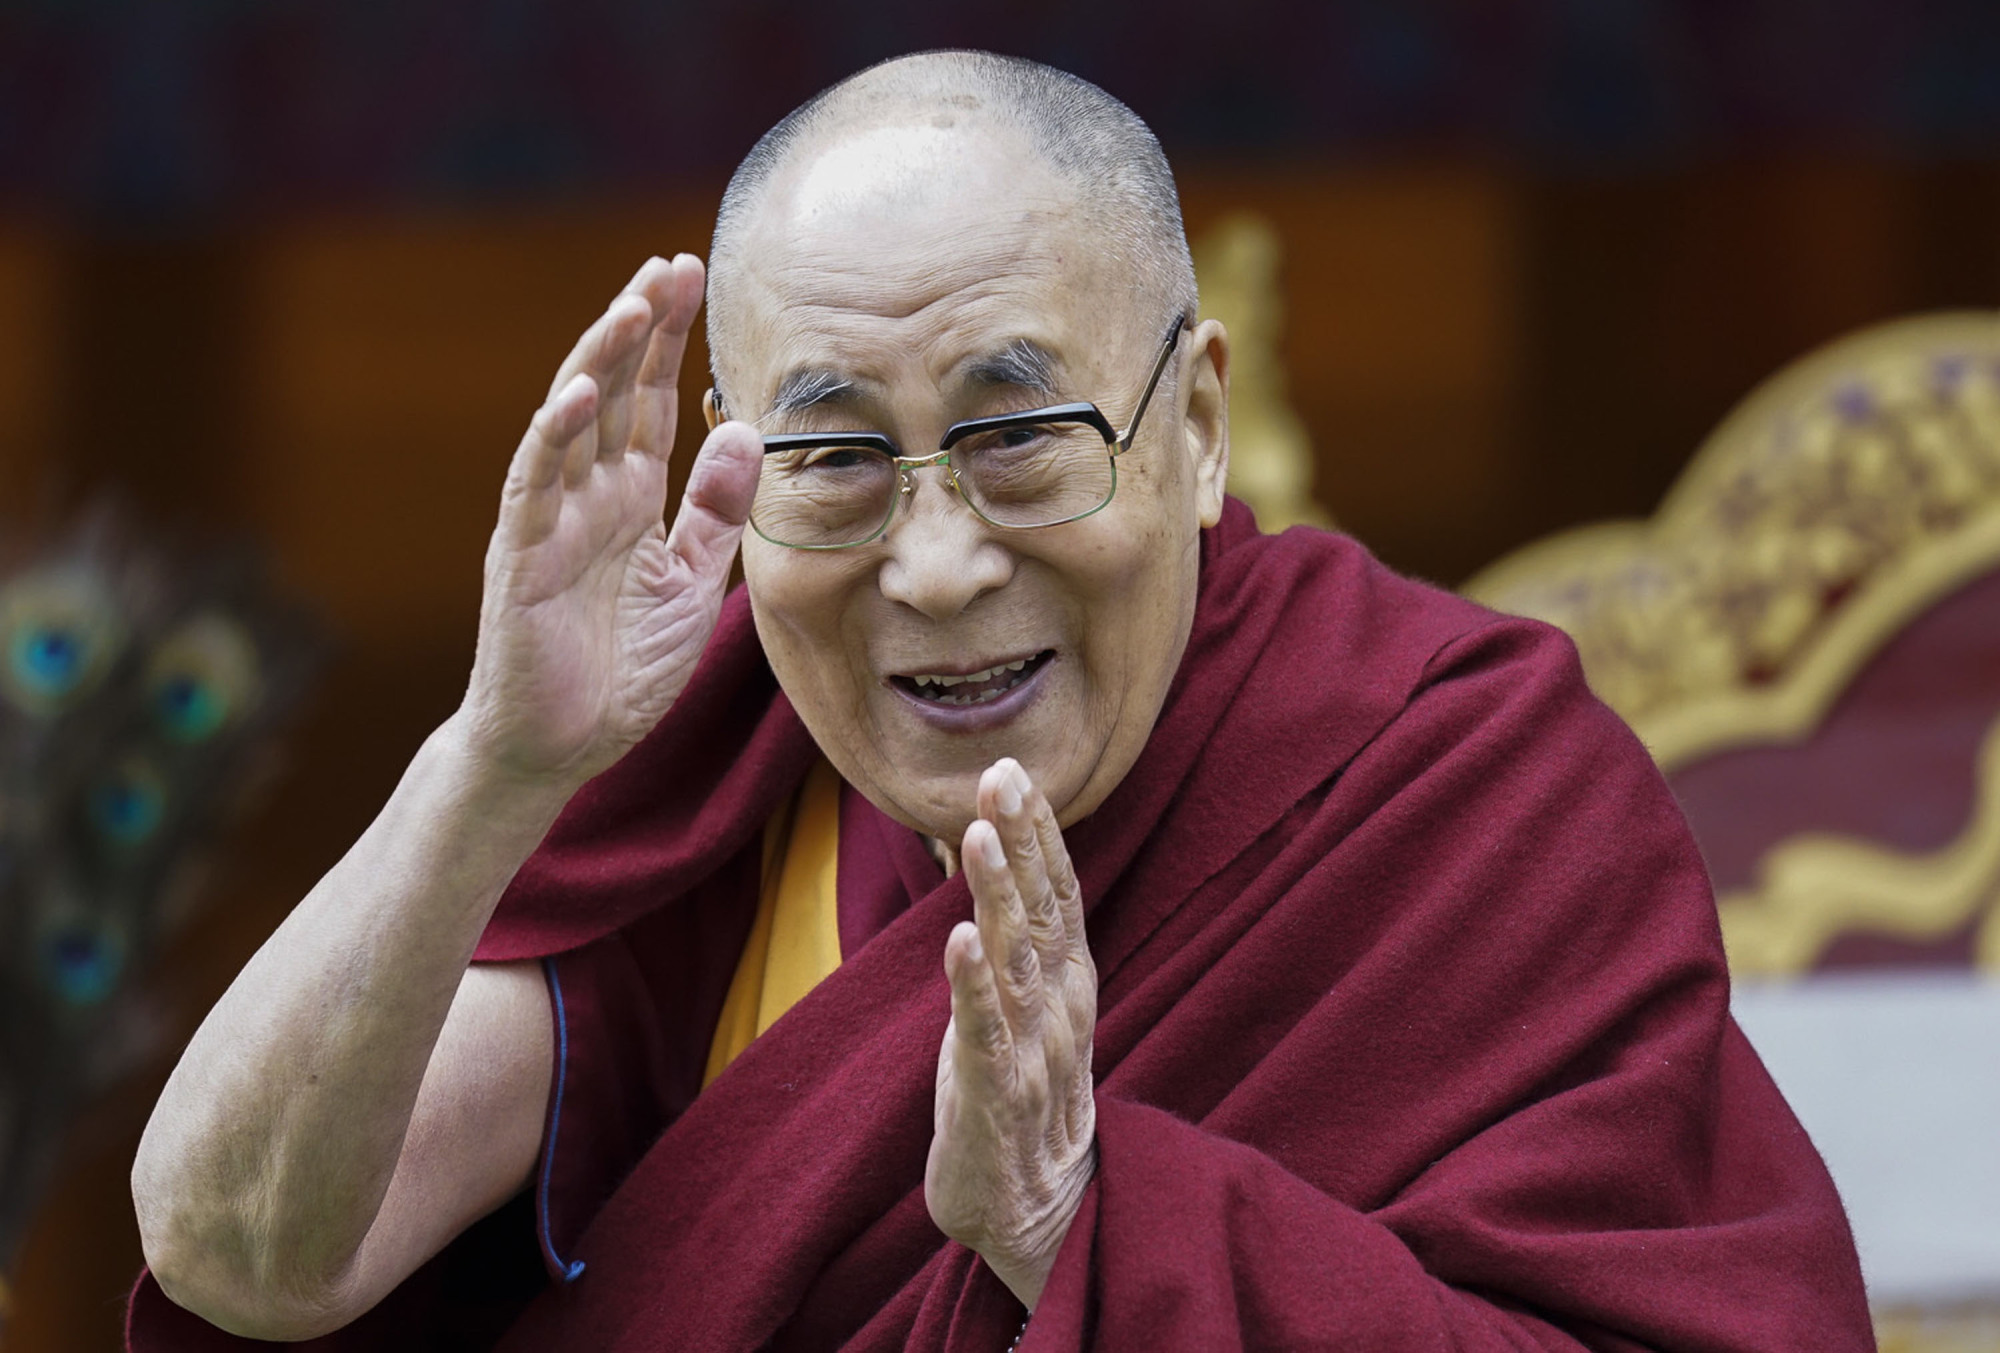 I prefer to remain in India and China doesn’t understand a variety of different cultures: Dalai Lama